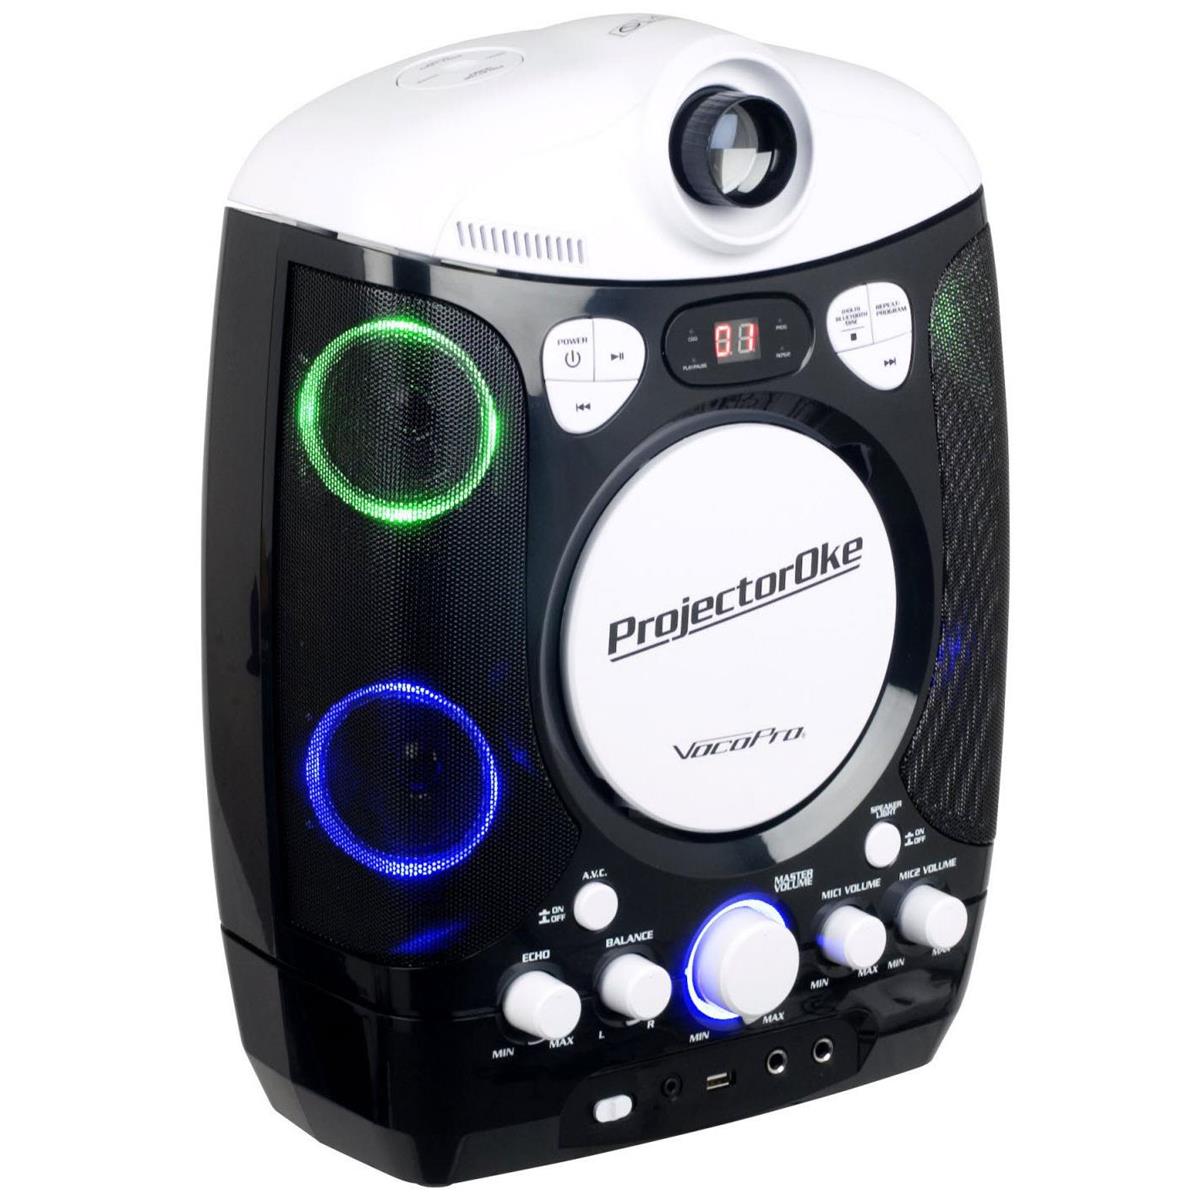 CD+G & Bluetooth-Enabled Karaoke System with LED Projector - VocoPro PROJECTOROKE